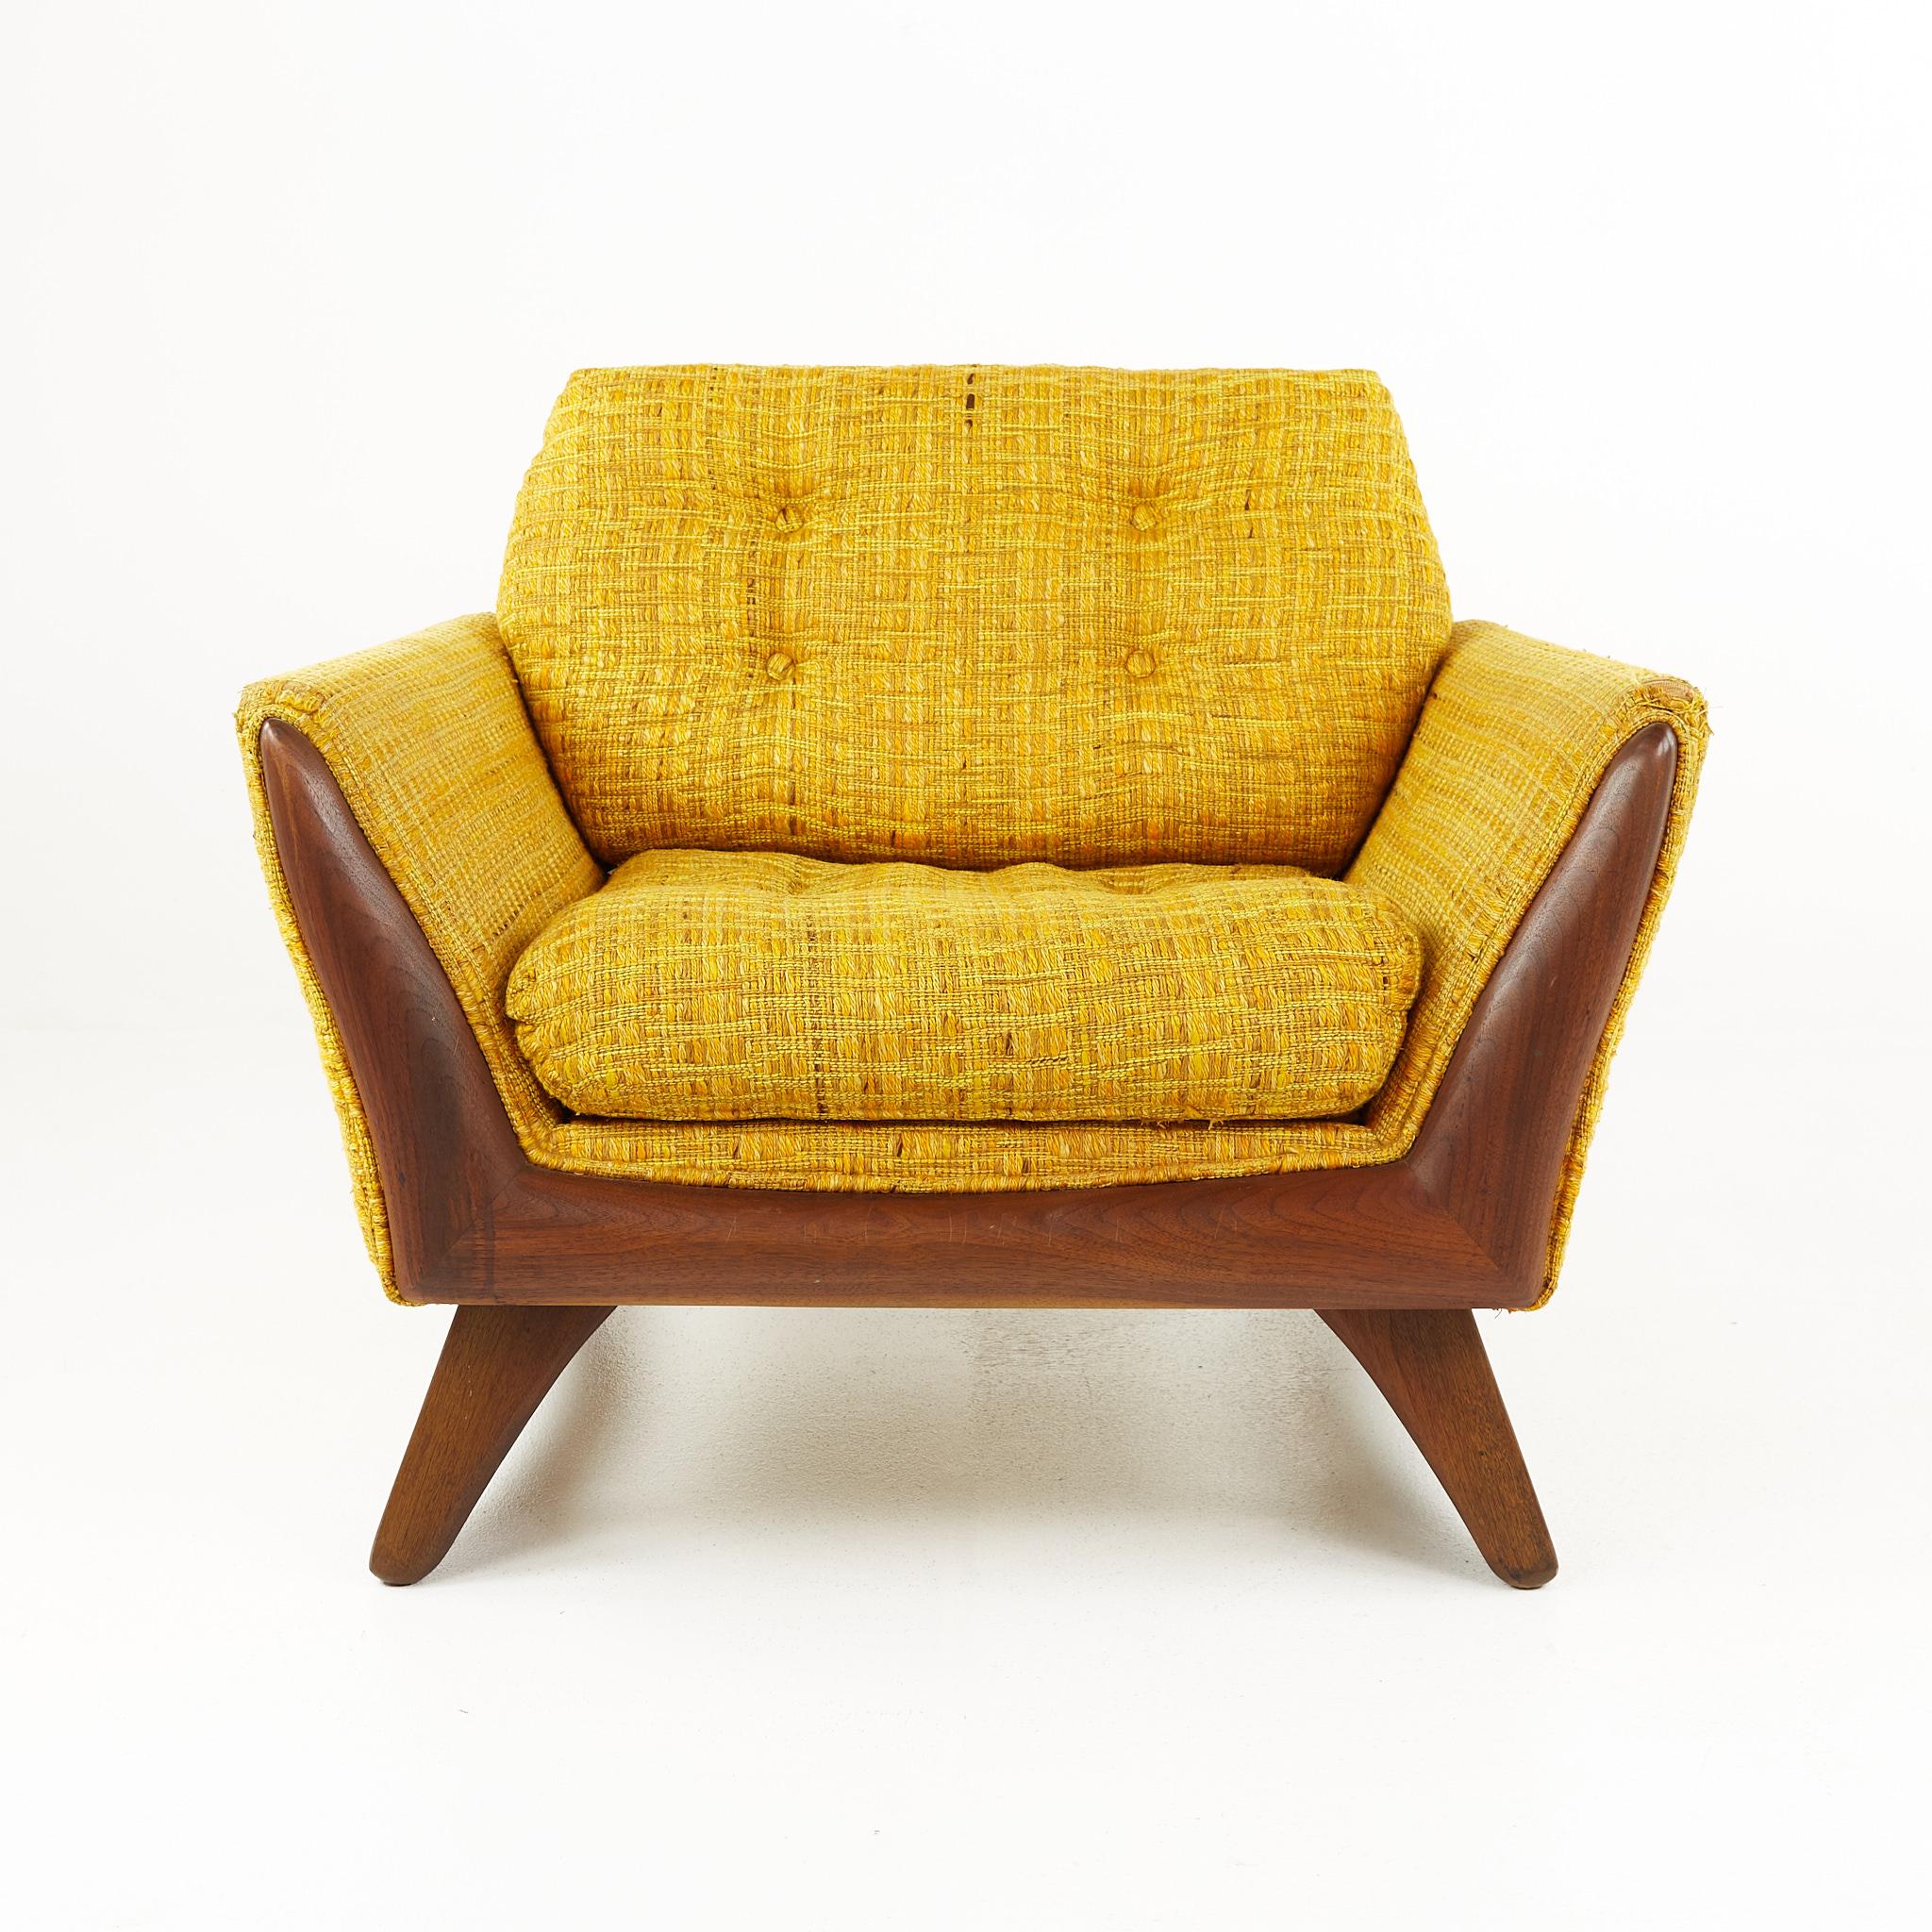 Adrian Pearsall mid century lounge chair yellow

This chair measures: 33 wide x 32 deep x 27.5 inches high with a seat height of 16 and arm height of 21.5 inches

All pieces of furniture can be had in what we call restored vintage condition.